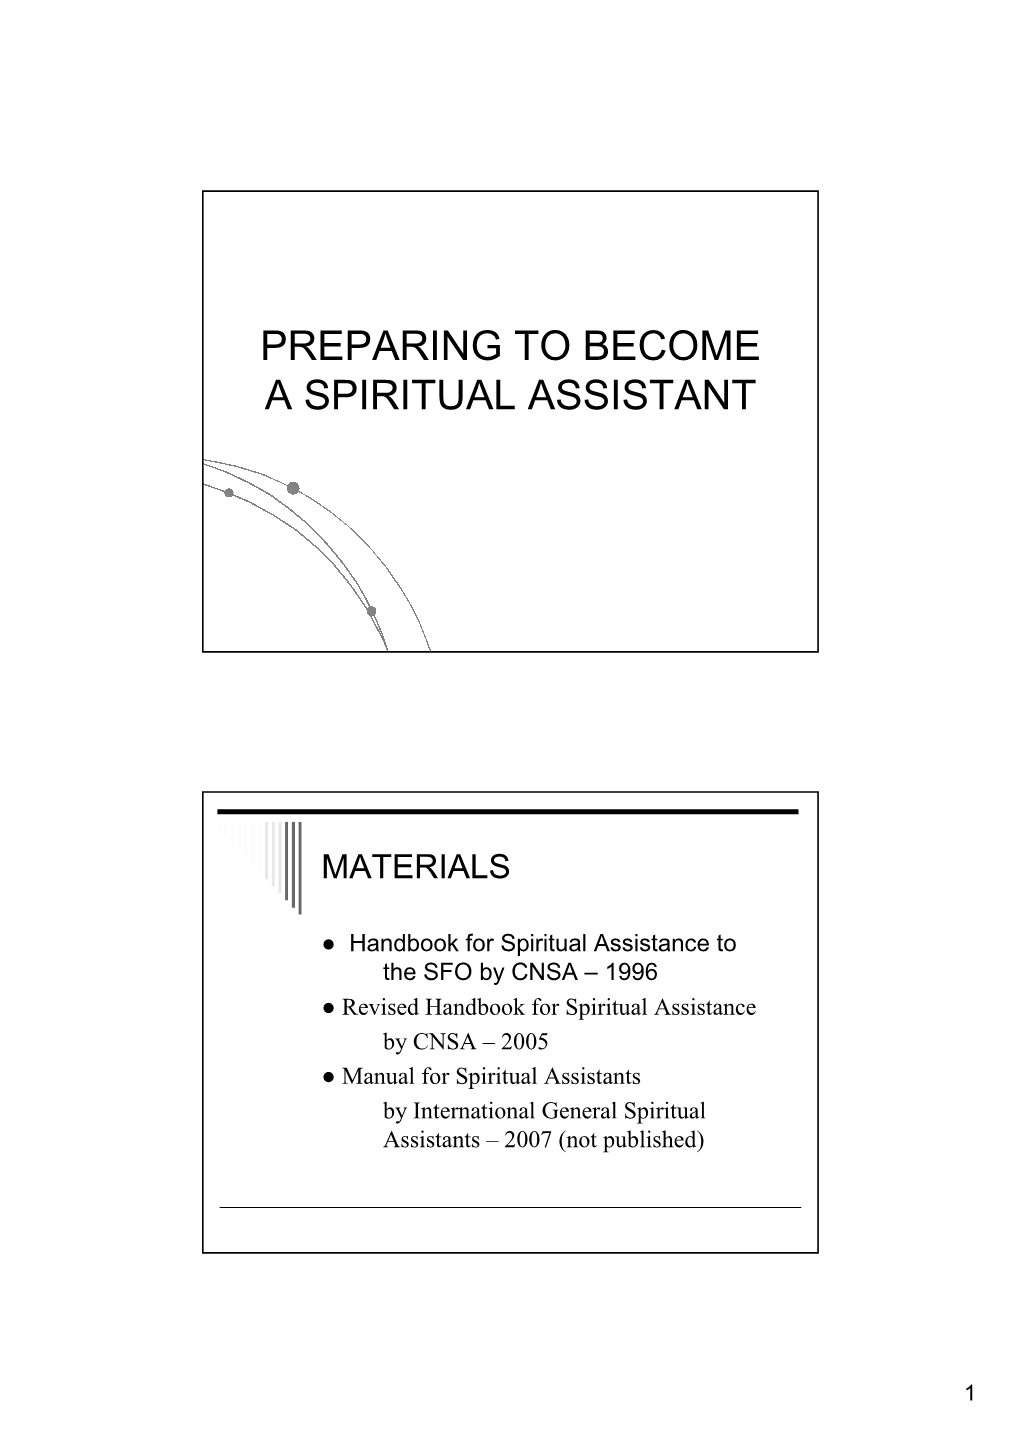 Preparing to Become a Spiritual Assistant